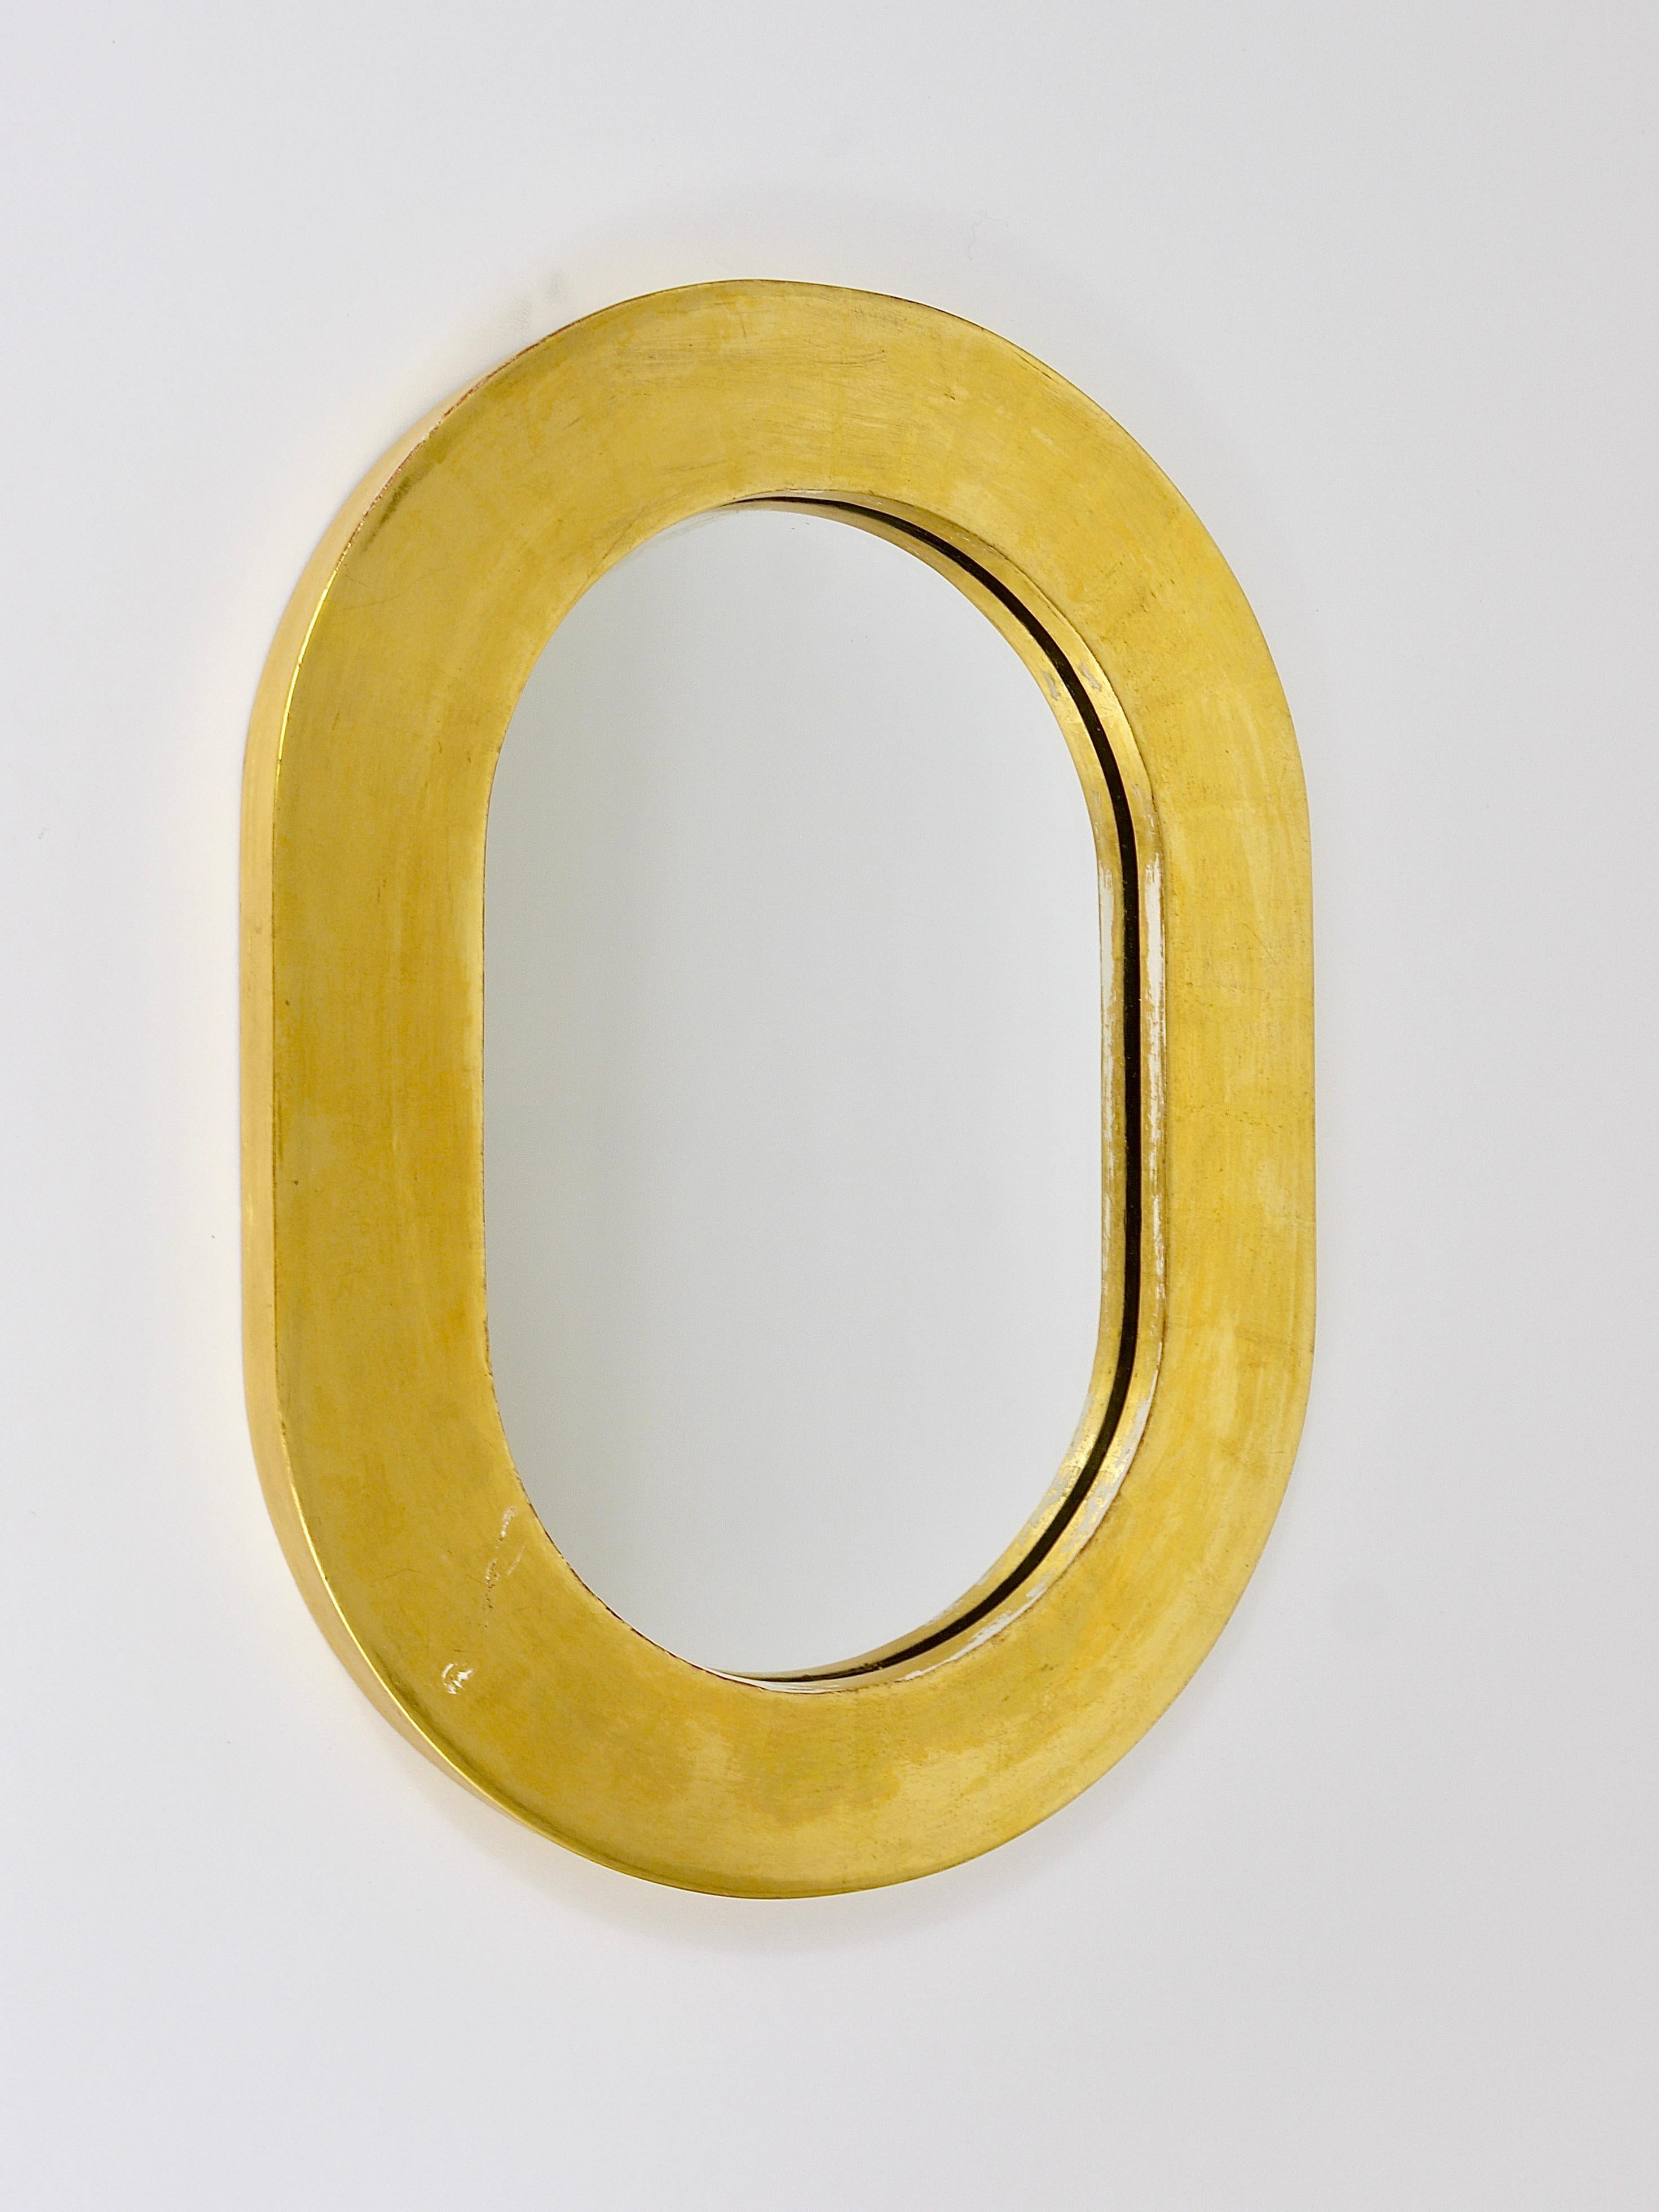 Carl Aubock Gold-Plated Midcentury Wall Mirror, Austria, 1960s For Sale 3